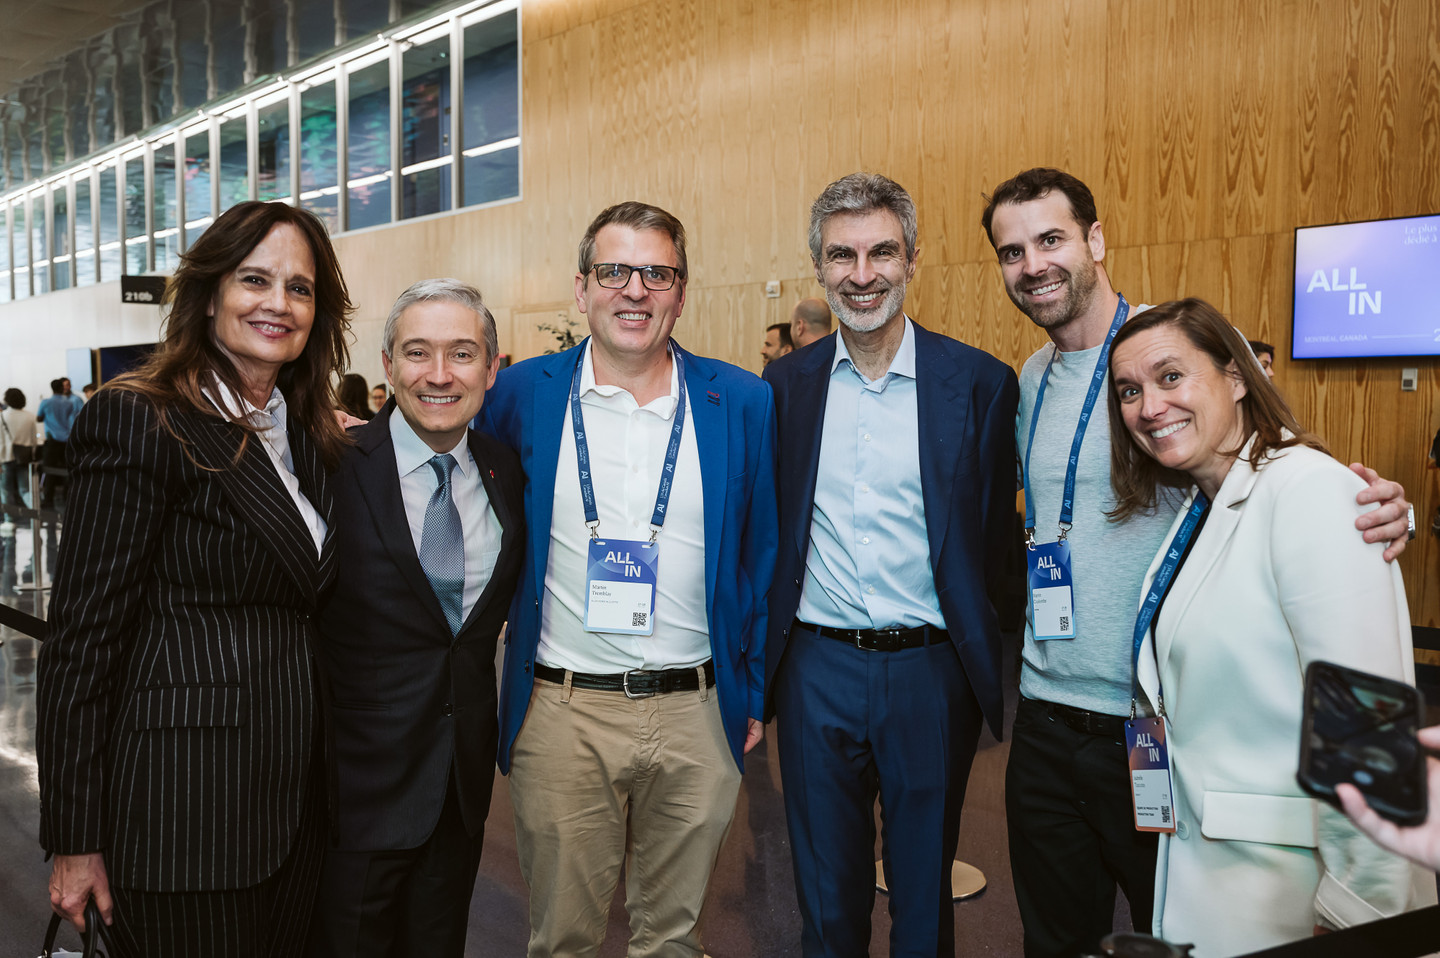 With Mme Desmarais, l'honorable François-Philippe Champagne, Martin Tremblay, Yoshua Bengio, Martin Coulombe, Isabelle Turcotte